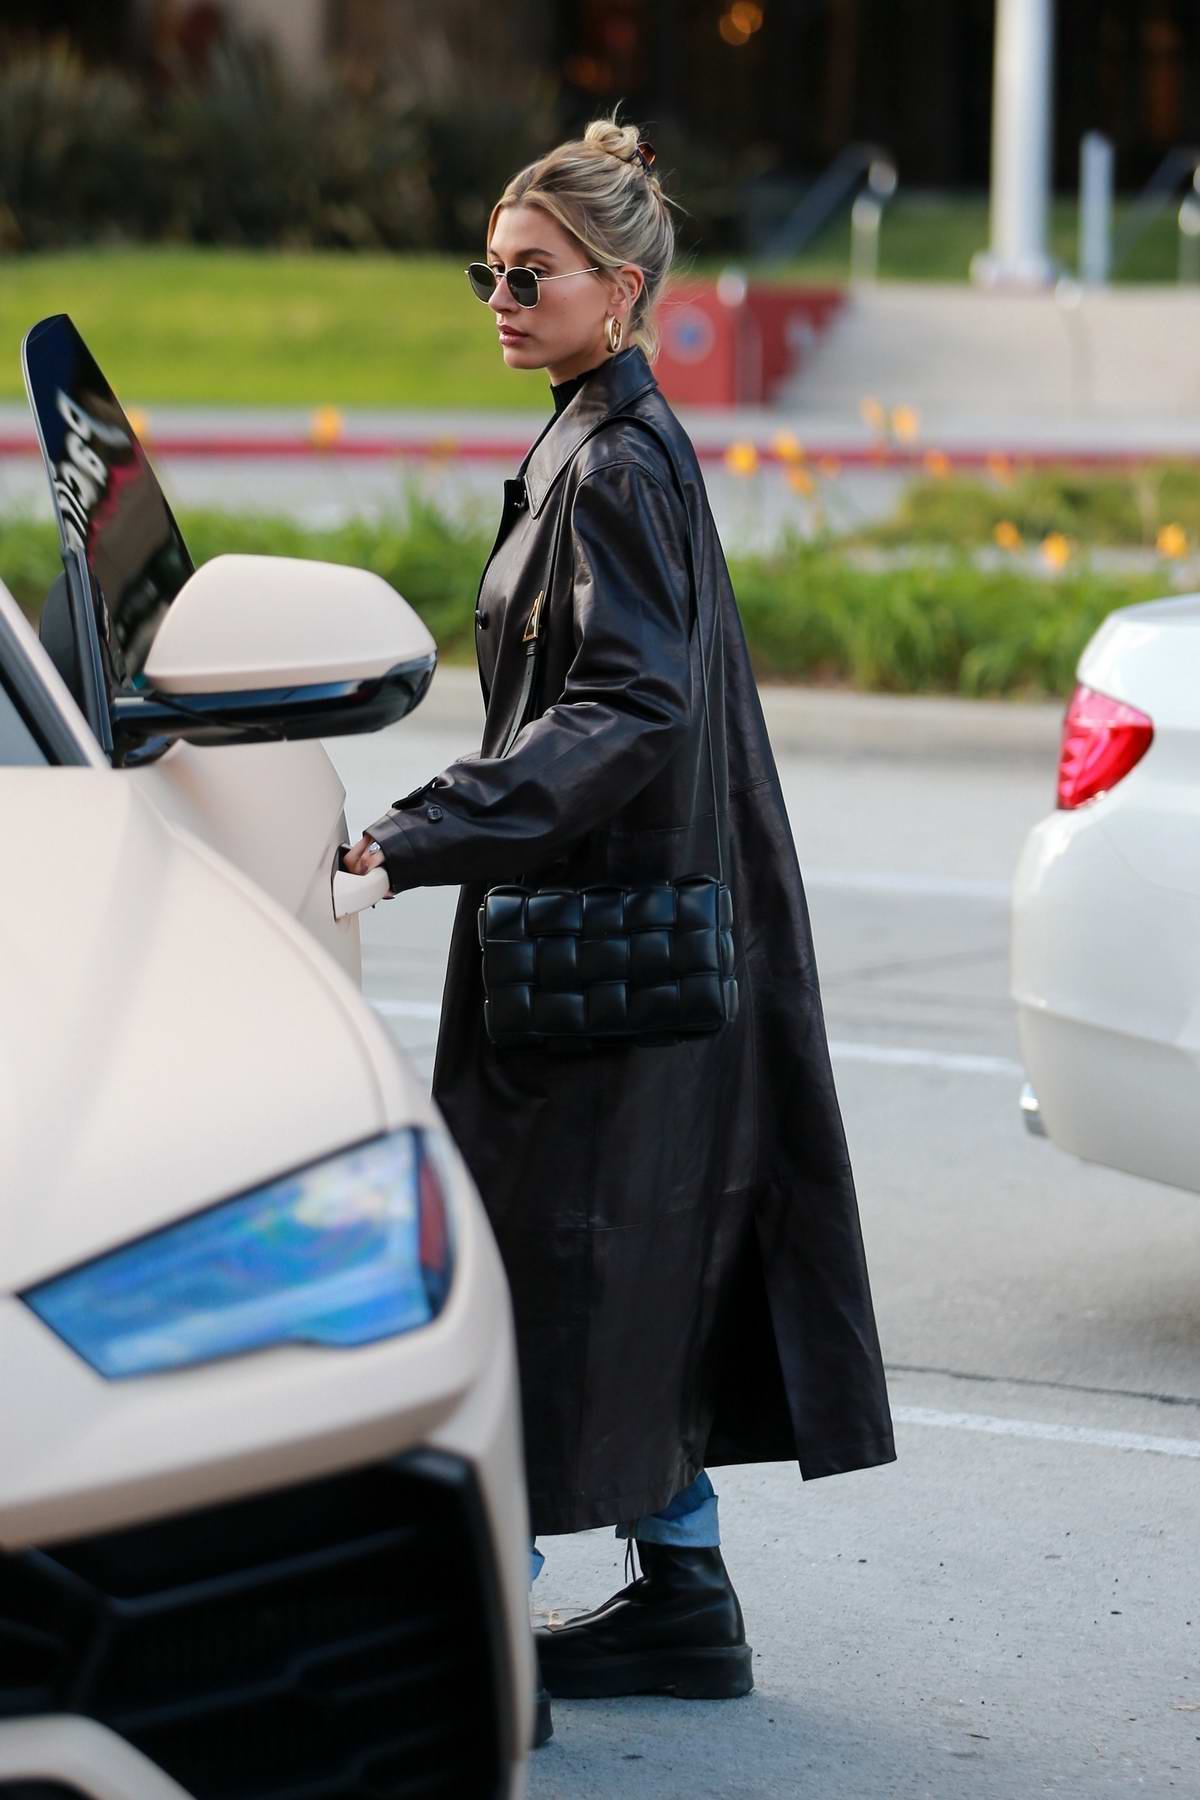 Hailey Bieber Steps Out Wearing A Leather Long Coat As She Heads For Lunch With A Friend In West